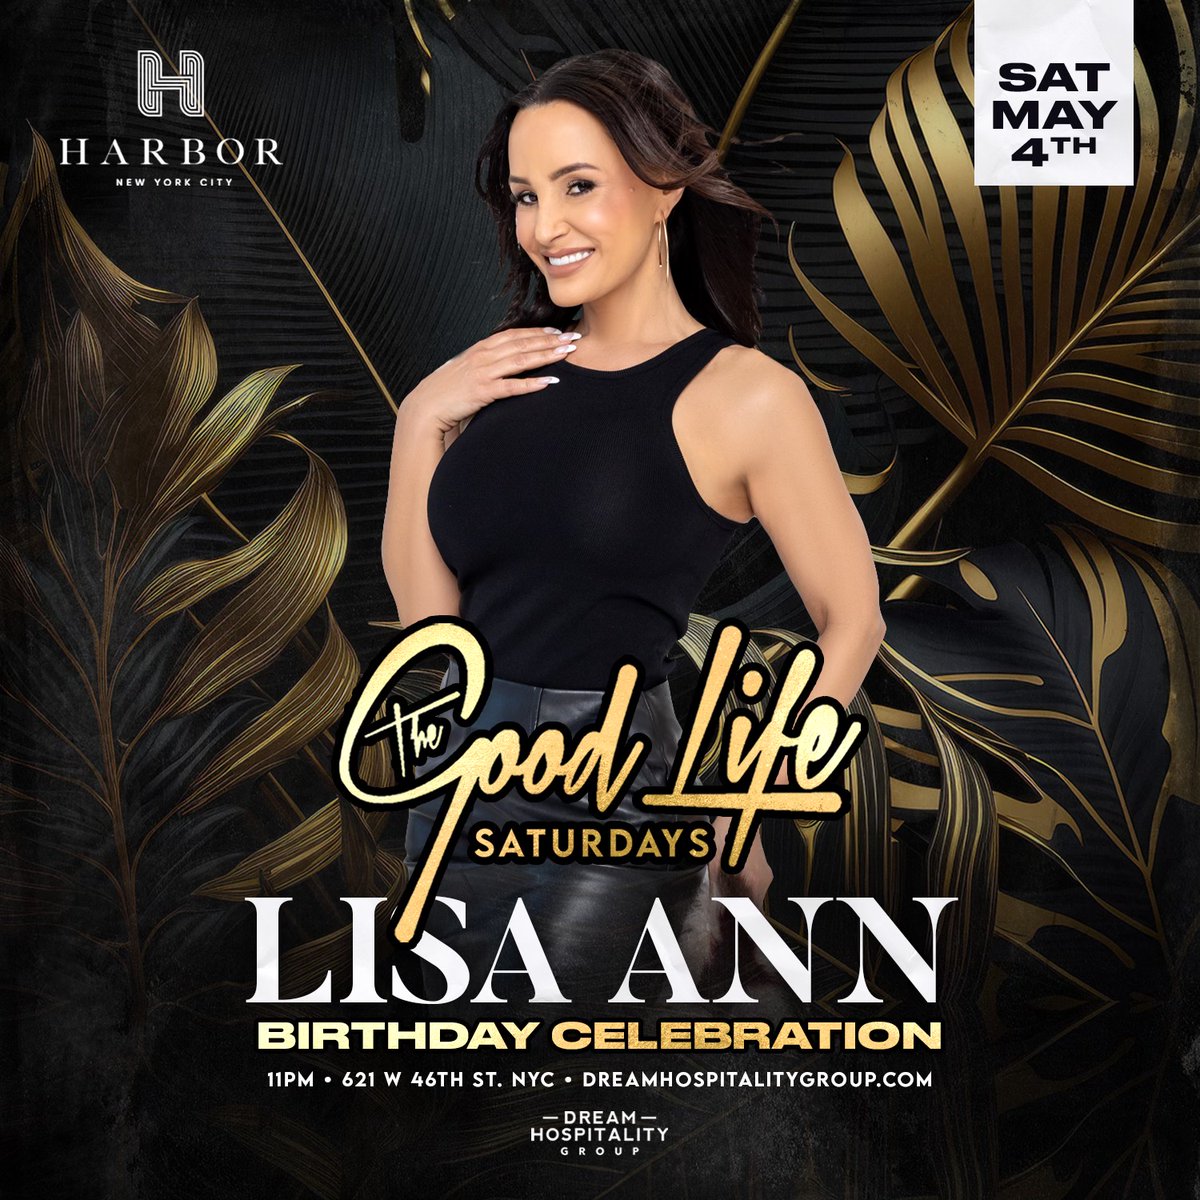 Just 3 days left until the big night!  🍾 🥳 The anticipation is building as we gear up for MY #BIRTHDAY celebration at @Harbornightclub! Who's ready to party? #thereallisaann #birthdaycelebration #harbornyc #nycnightlife #finalcountdown